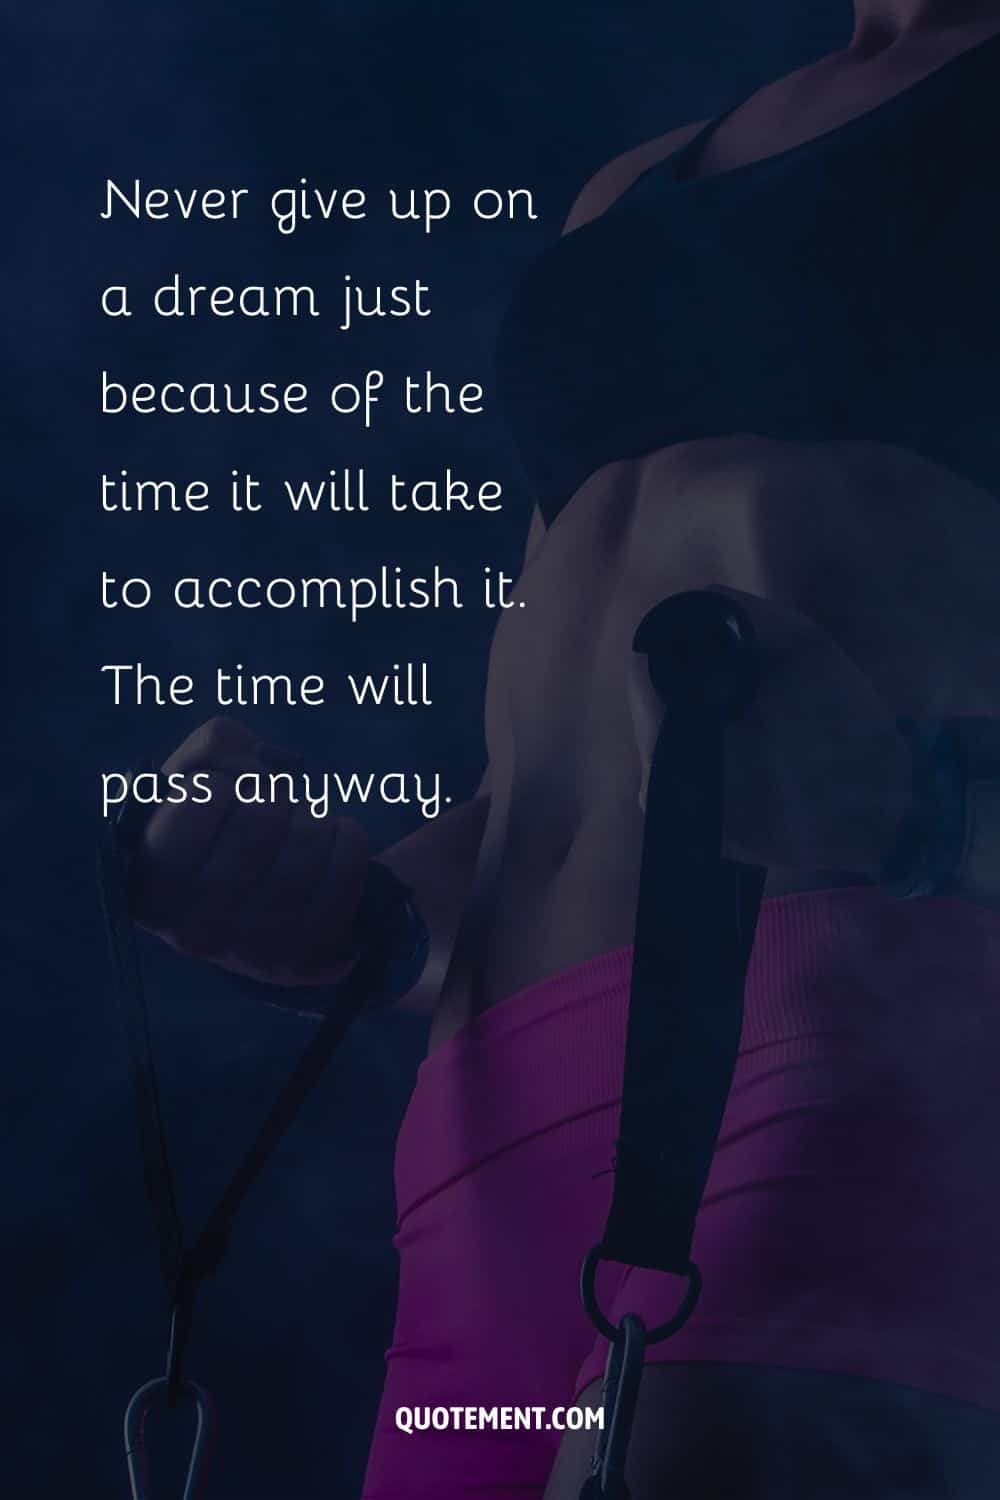 Never give up on a dream just because of the time it will take to accomplish it